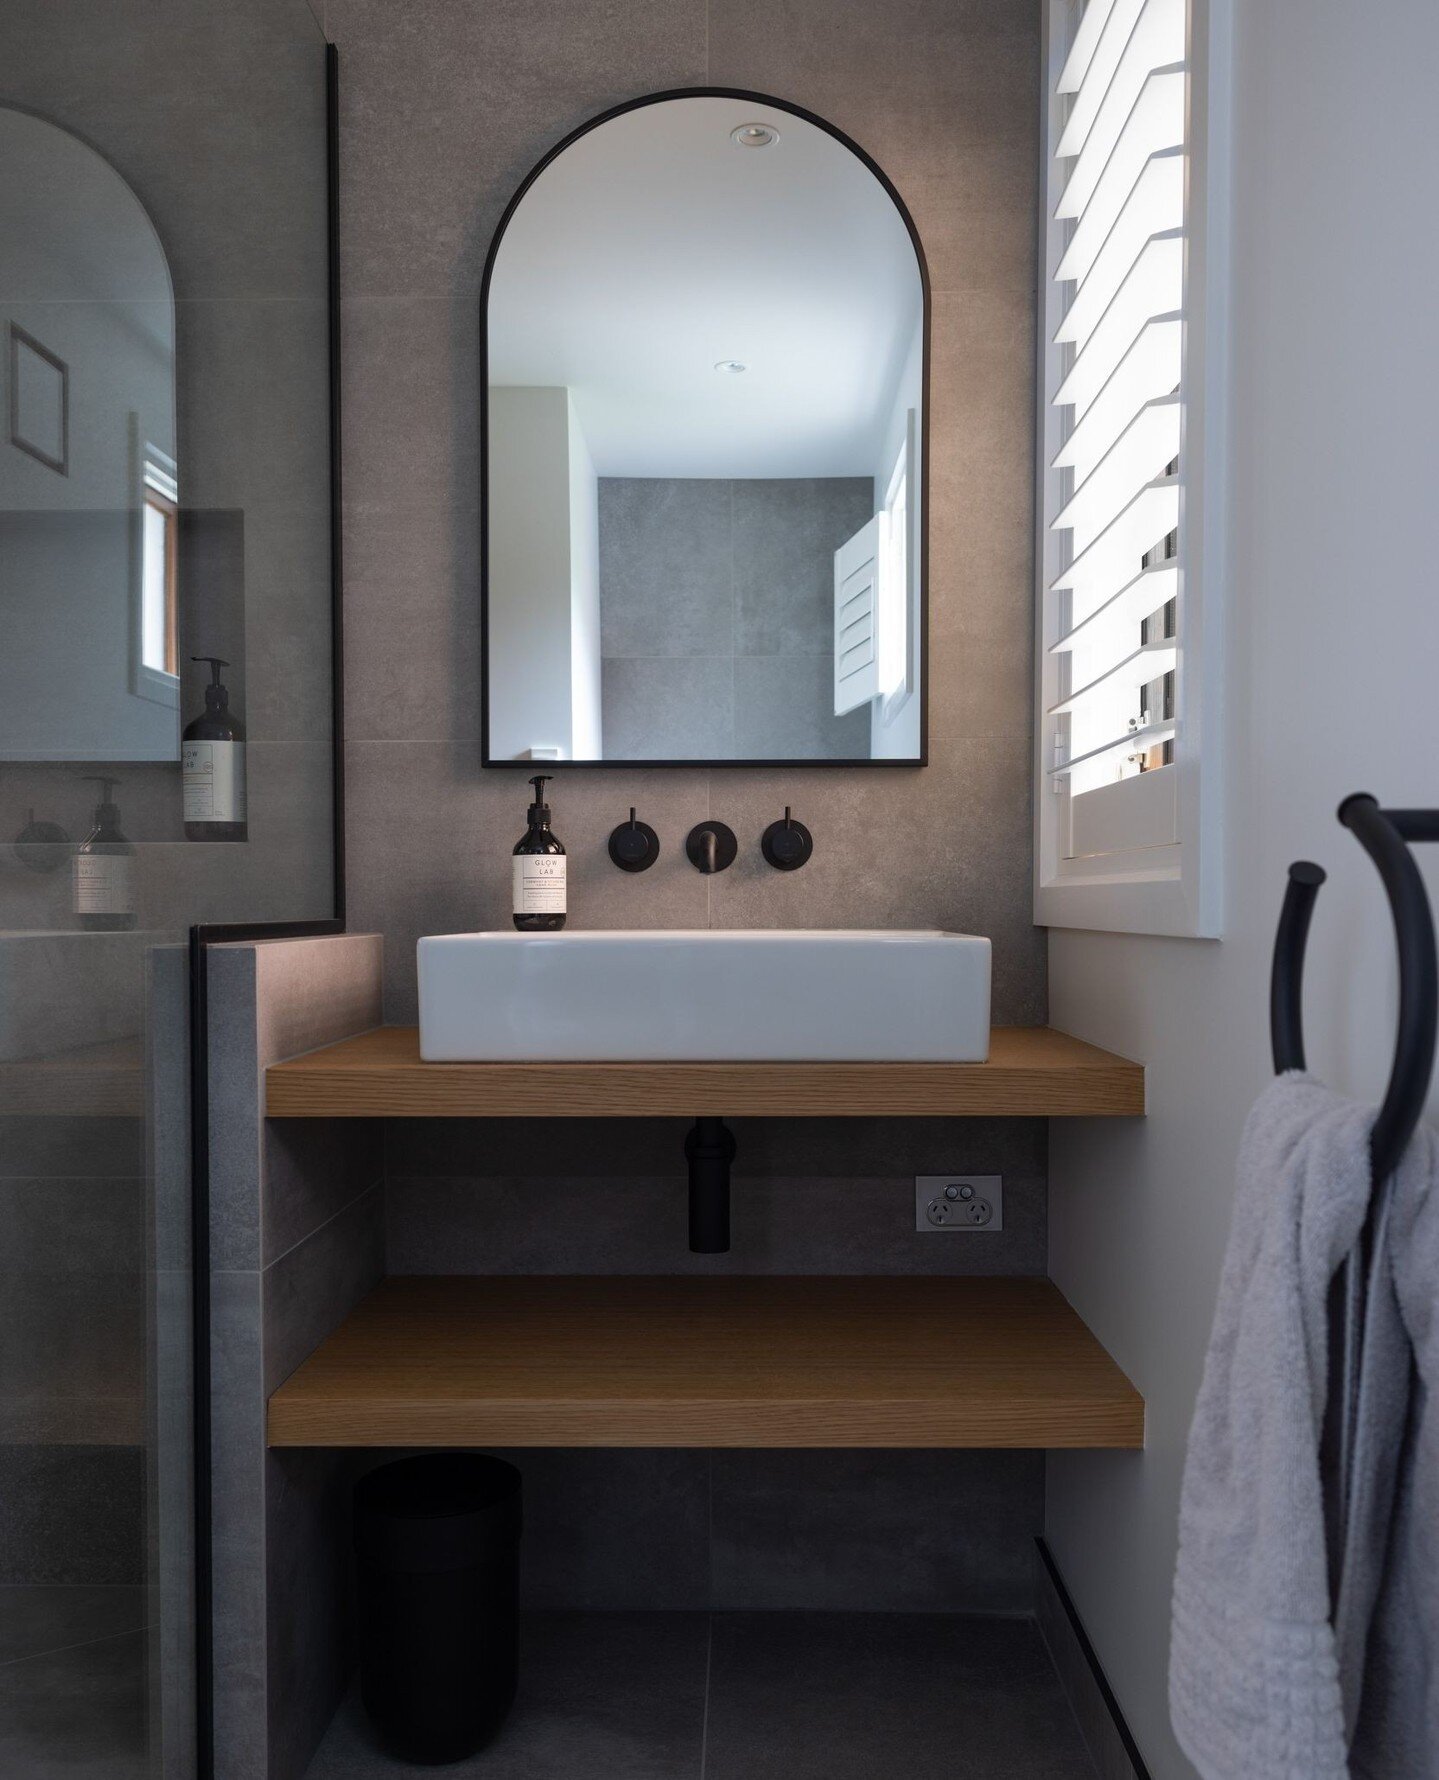 A clever use of space in this main bathroom of our Banks Peninsula Renovation.⁠
Featuring black hardware and natural timber, this simple design fuses straight lines and curves seamlessly.⁠
⁠
📷️ @annamcleodphotography